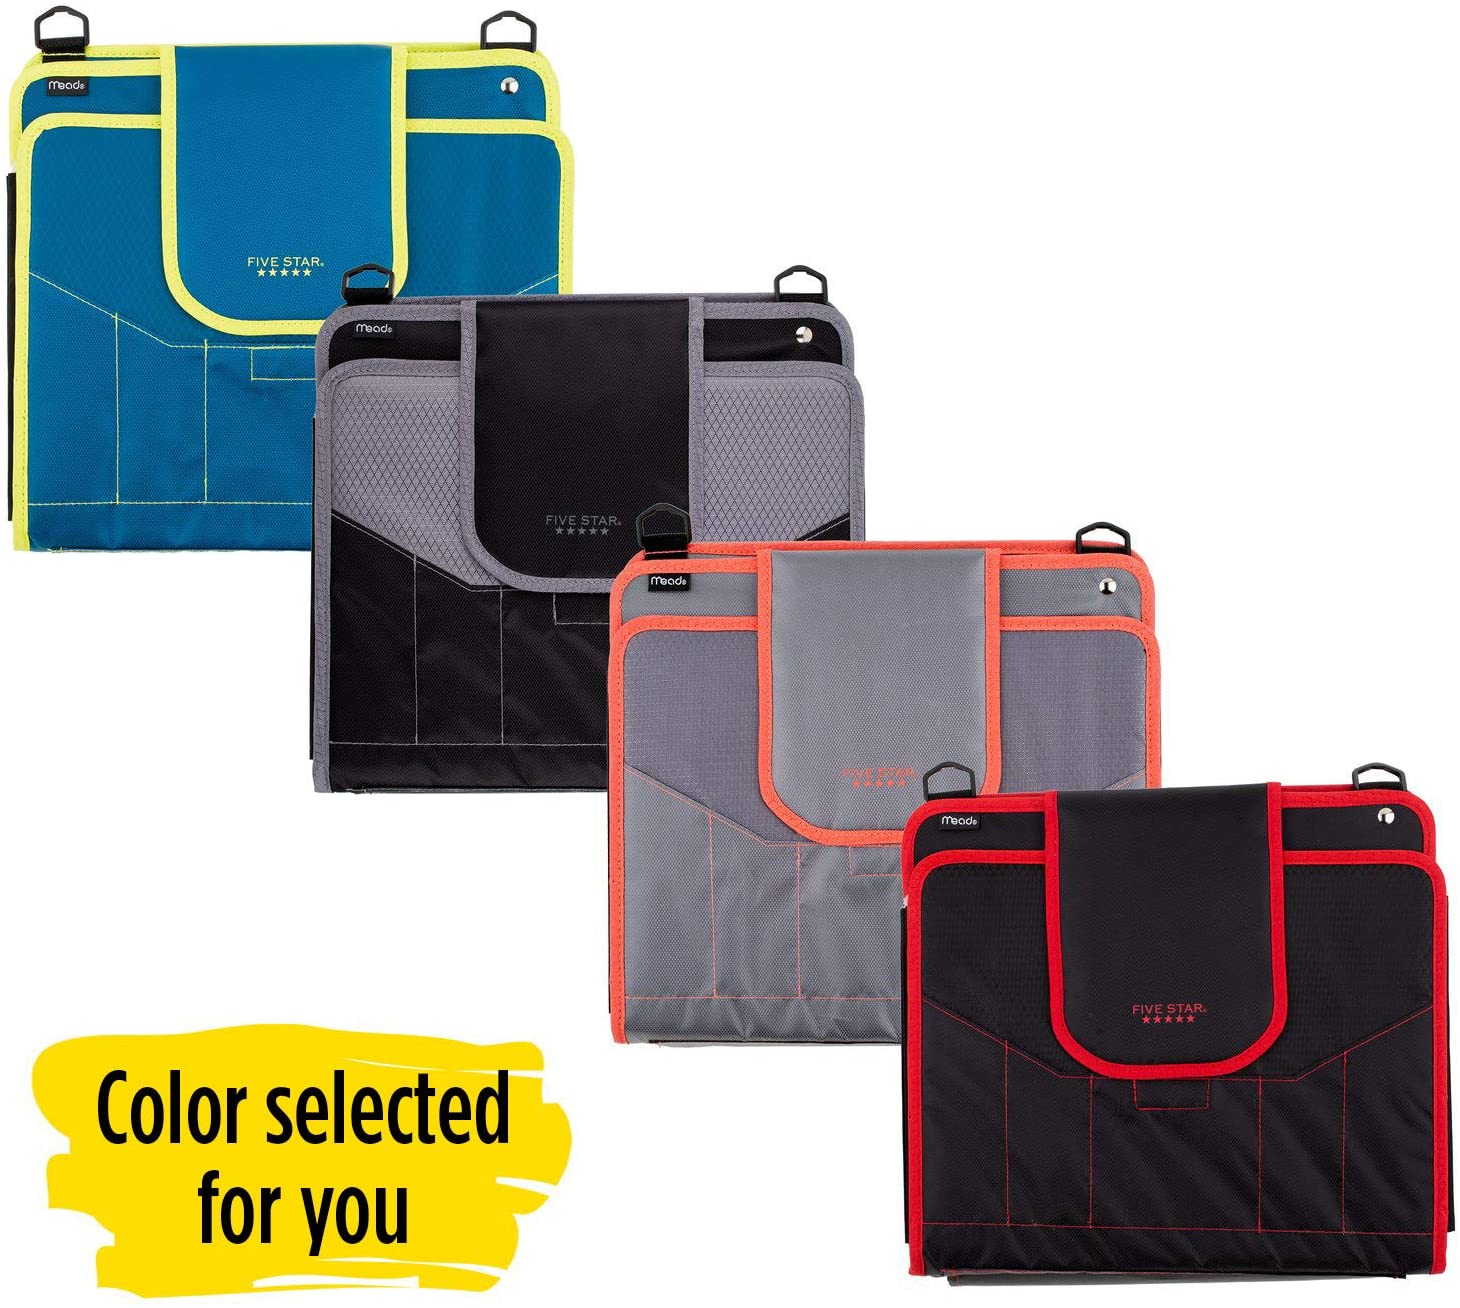 ''Five Star Sewn Zipper Binder, Fabric, 2 Inch 3 RING Binder With 4 Inch Capacity, Assorted Colors, C